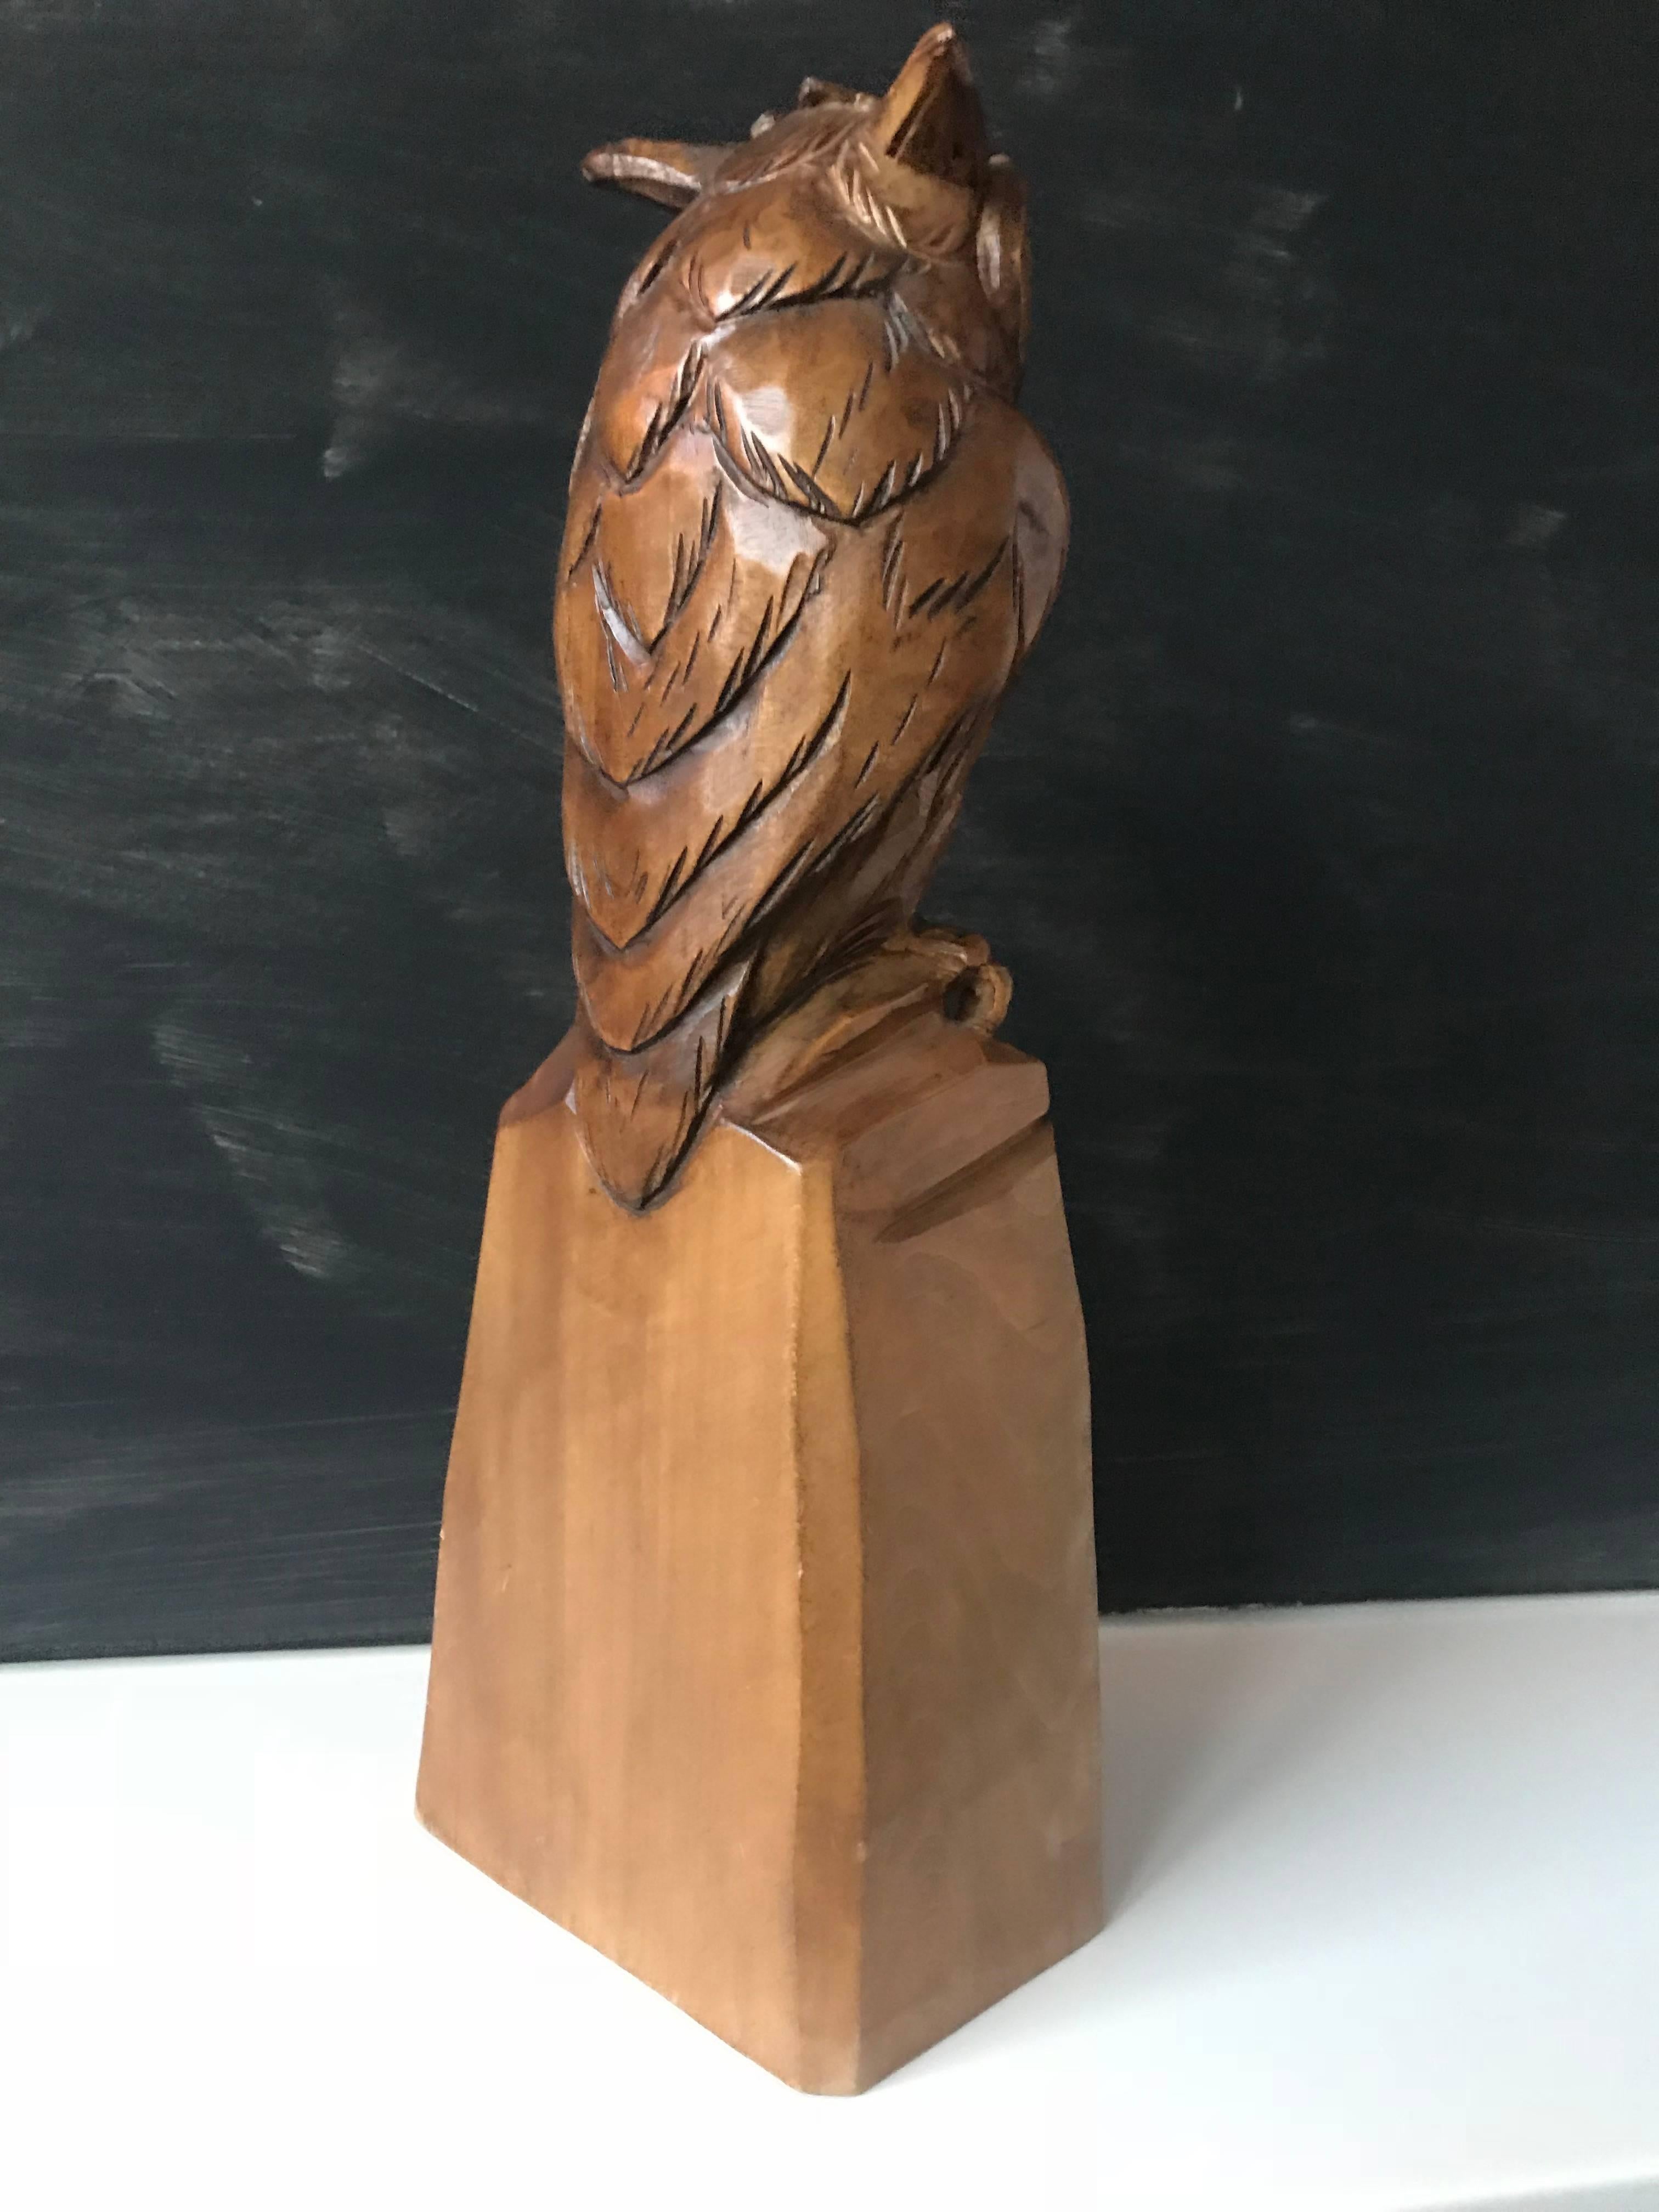 Hand-Carved Stylish Carved Wooden Owl Sculpture Symbol of Wisdom and Learning with Signature